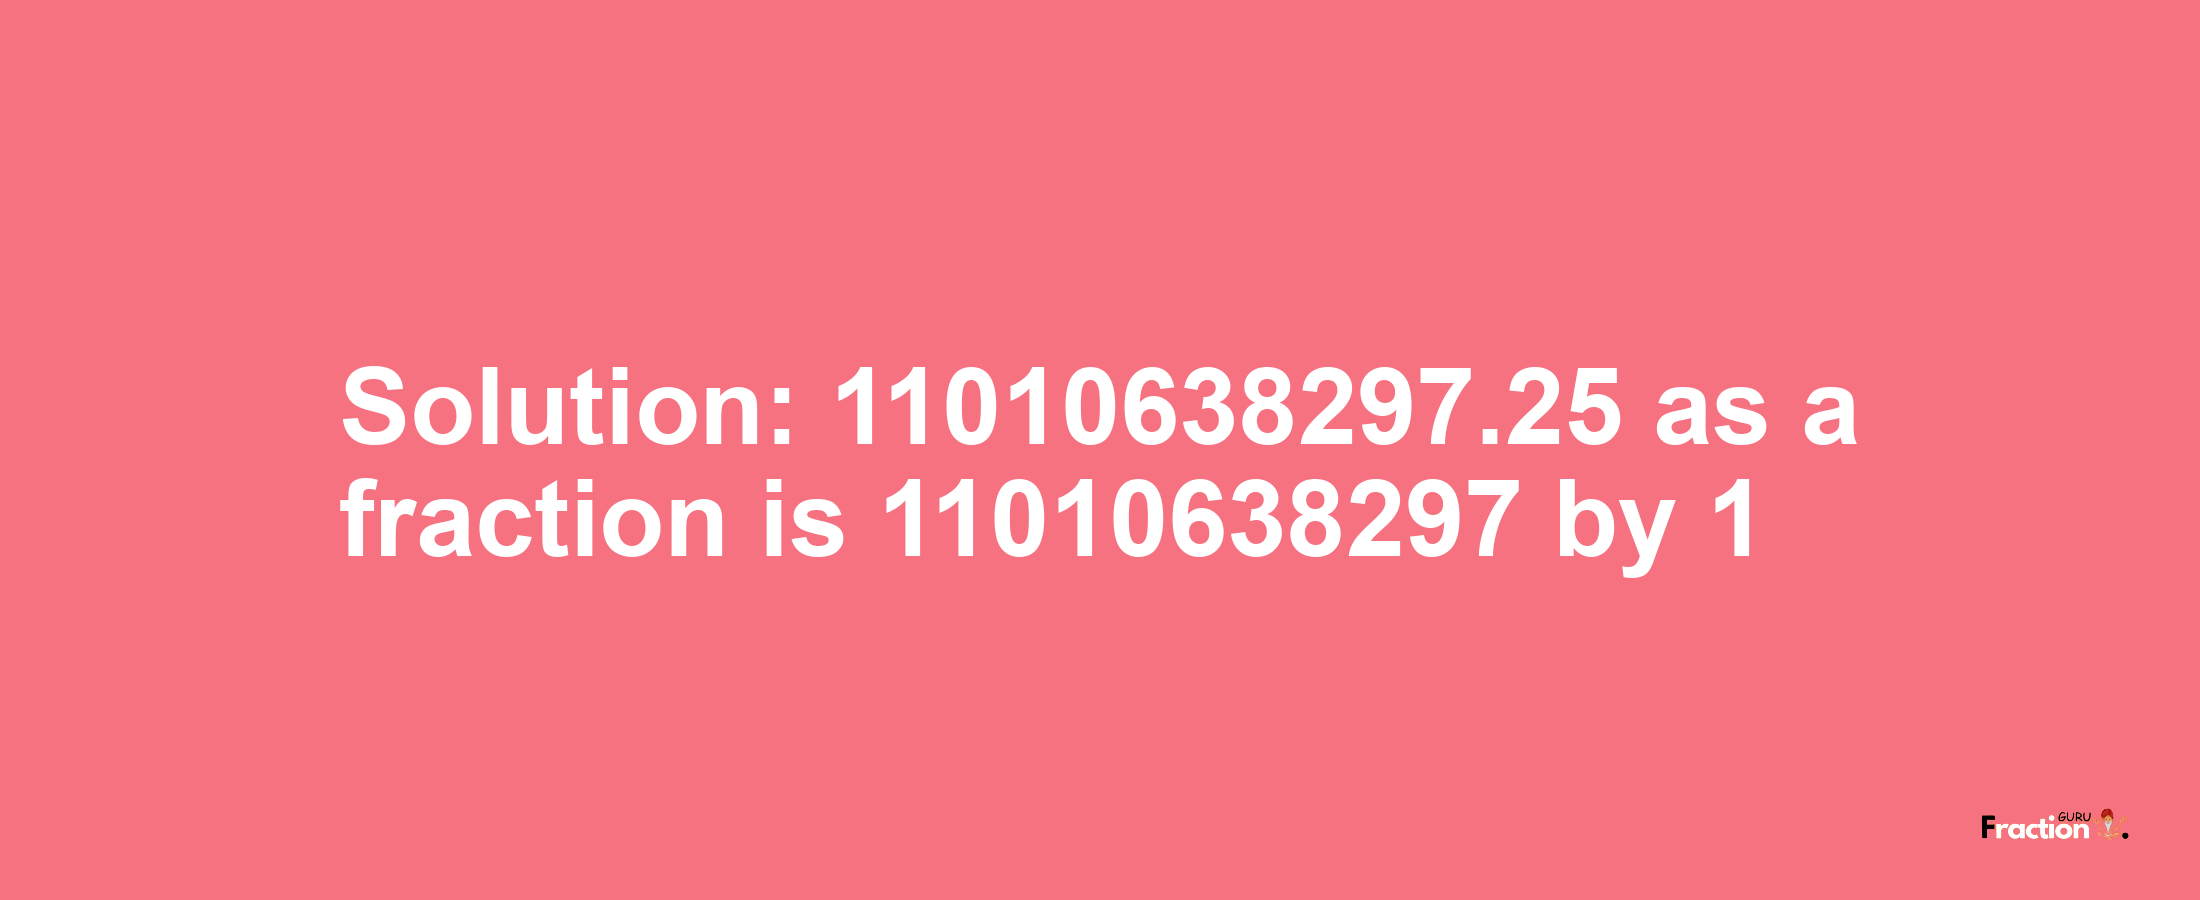 Solution:11010638297.25 as a fraction is 11010638297/1